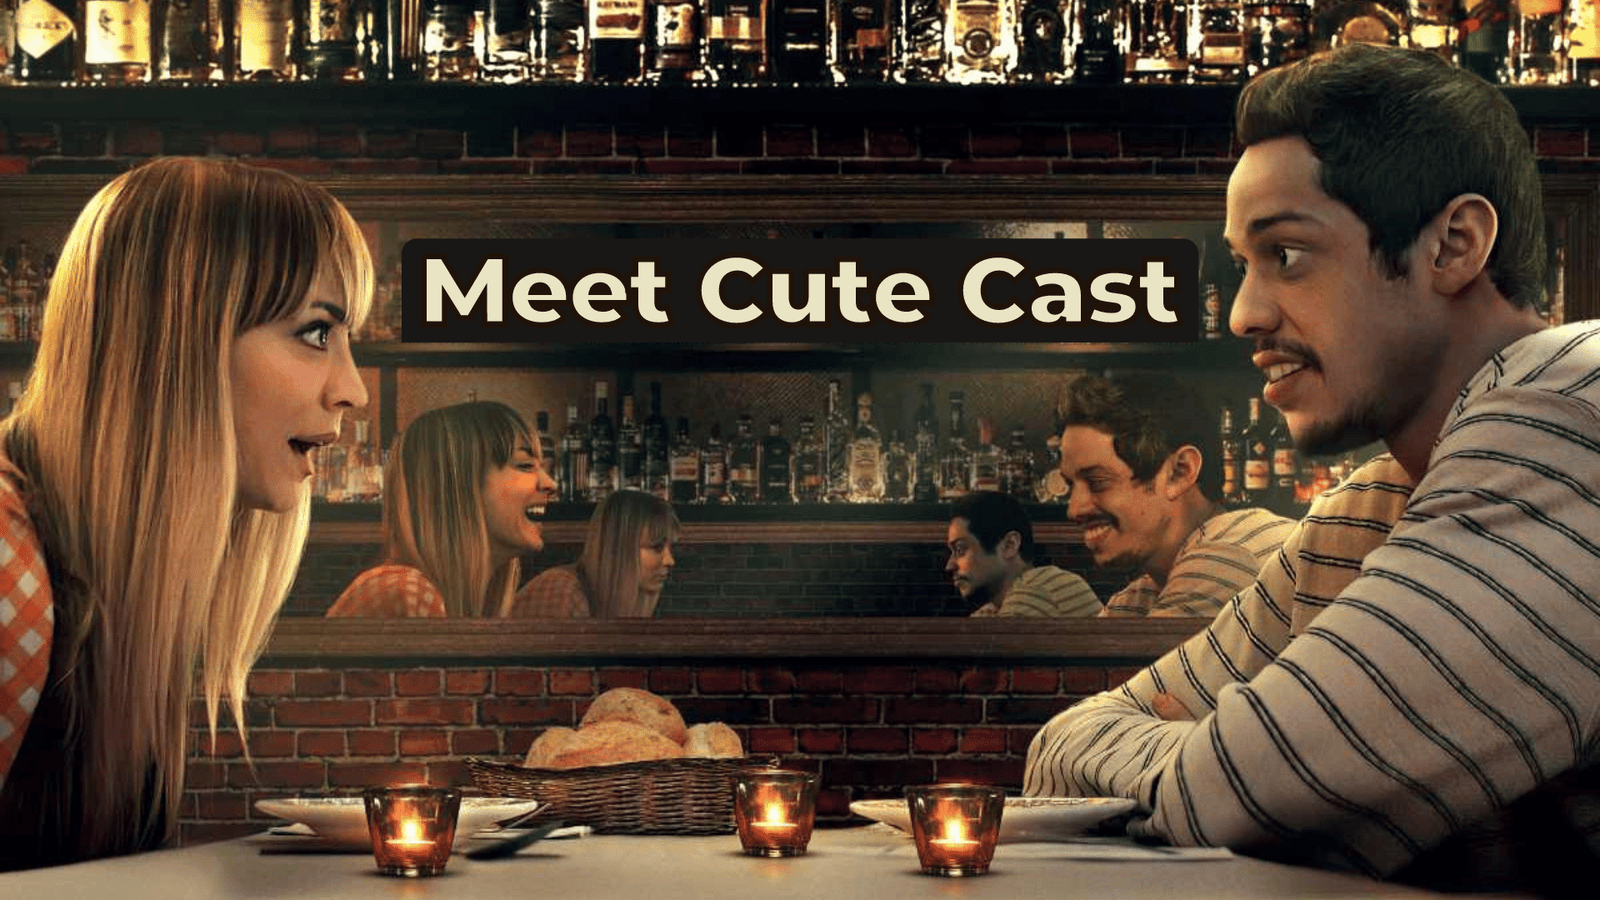 Meet Cute Cast - Ages, Partners, Characters